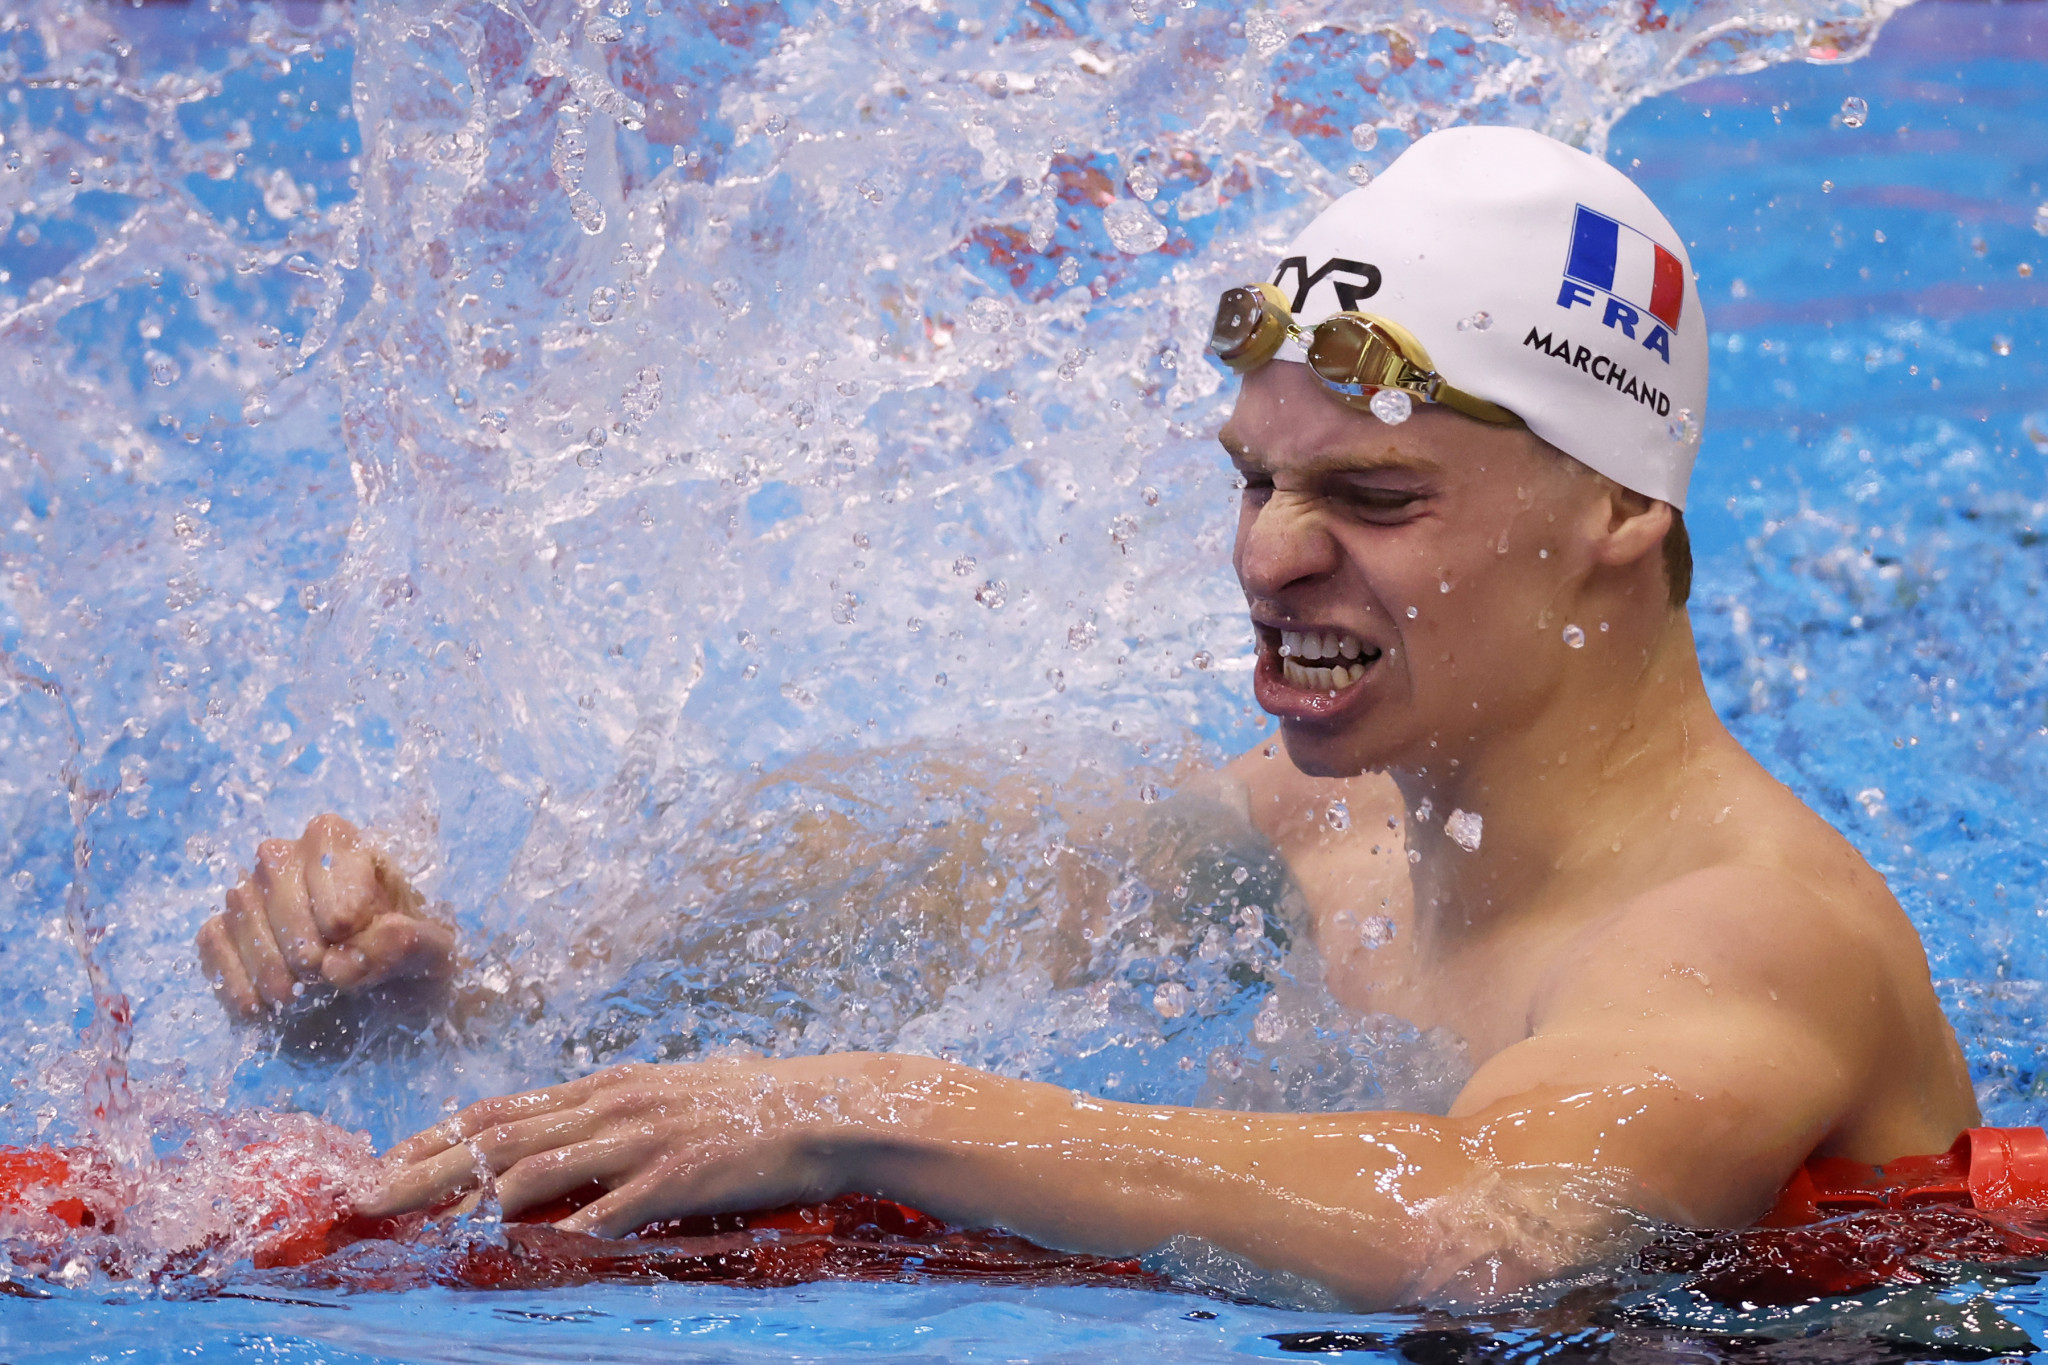 French swimmer Leon Marchand is set to benefit from direct support from LVMH as part of the company's premium partnership with Paris 2024 ©Getty Images